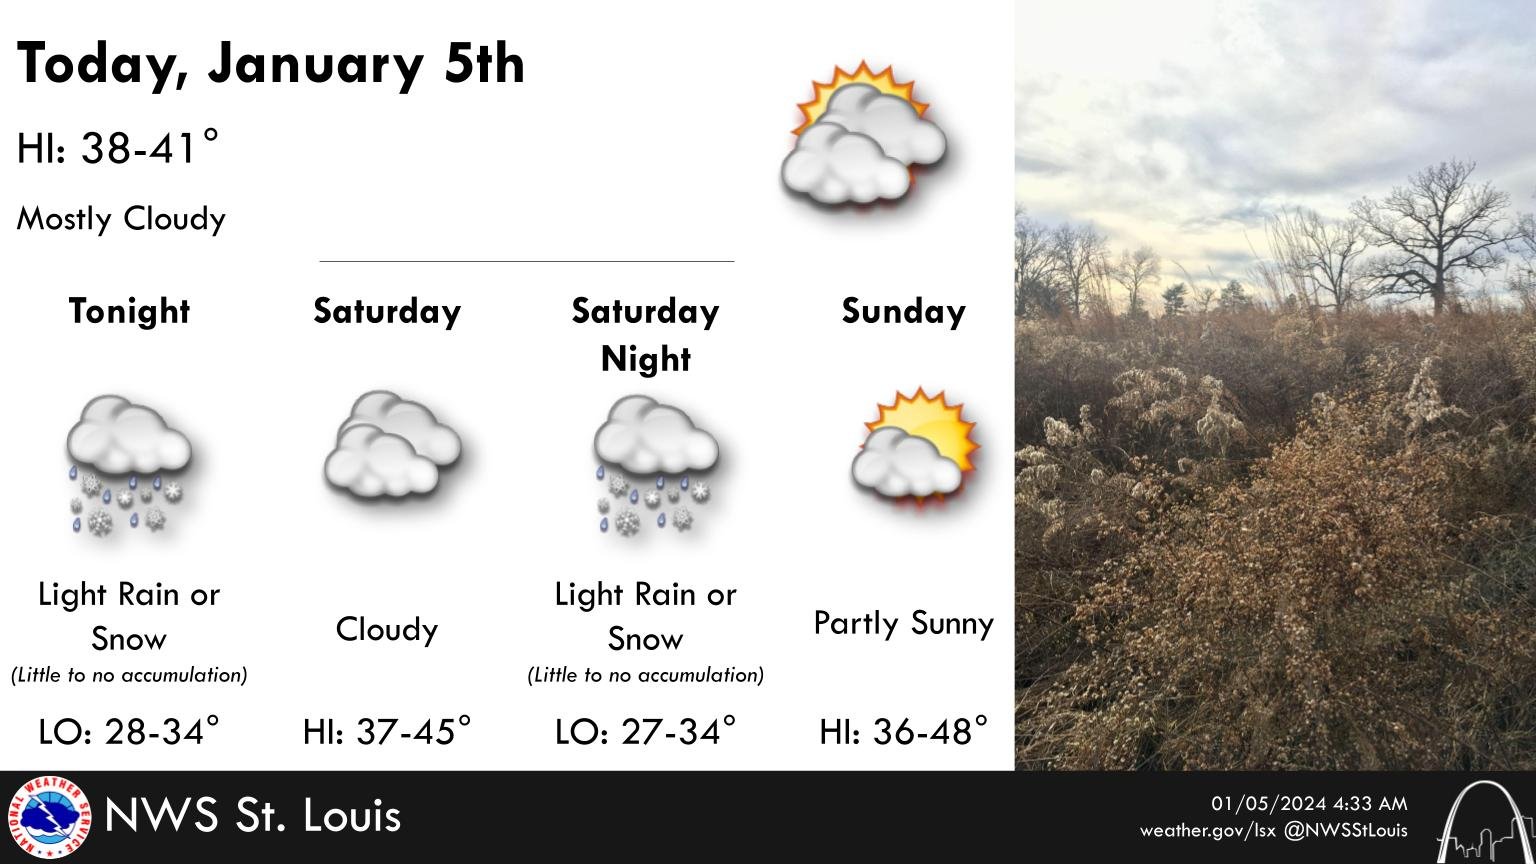 Light snow expected in mid-Missouri this weekend; winter storm possible next week